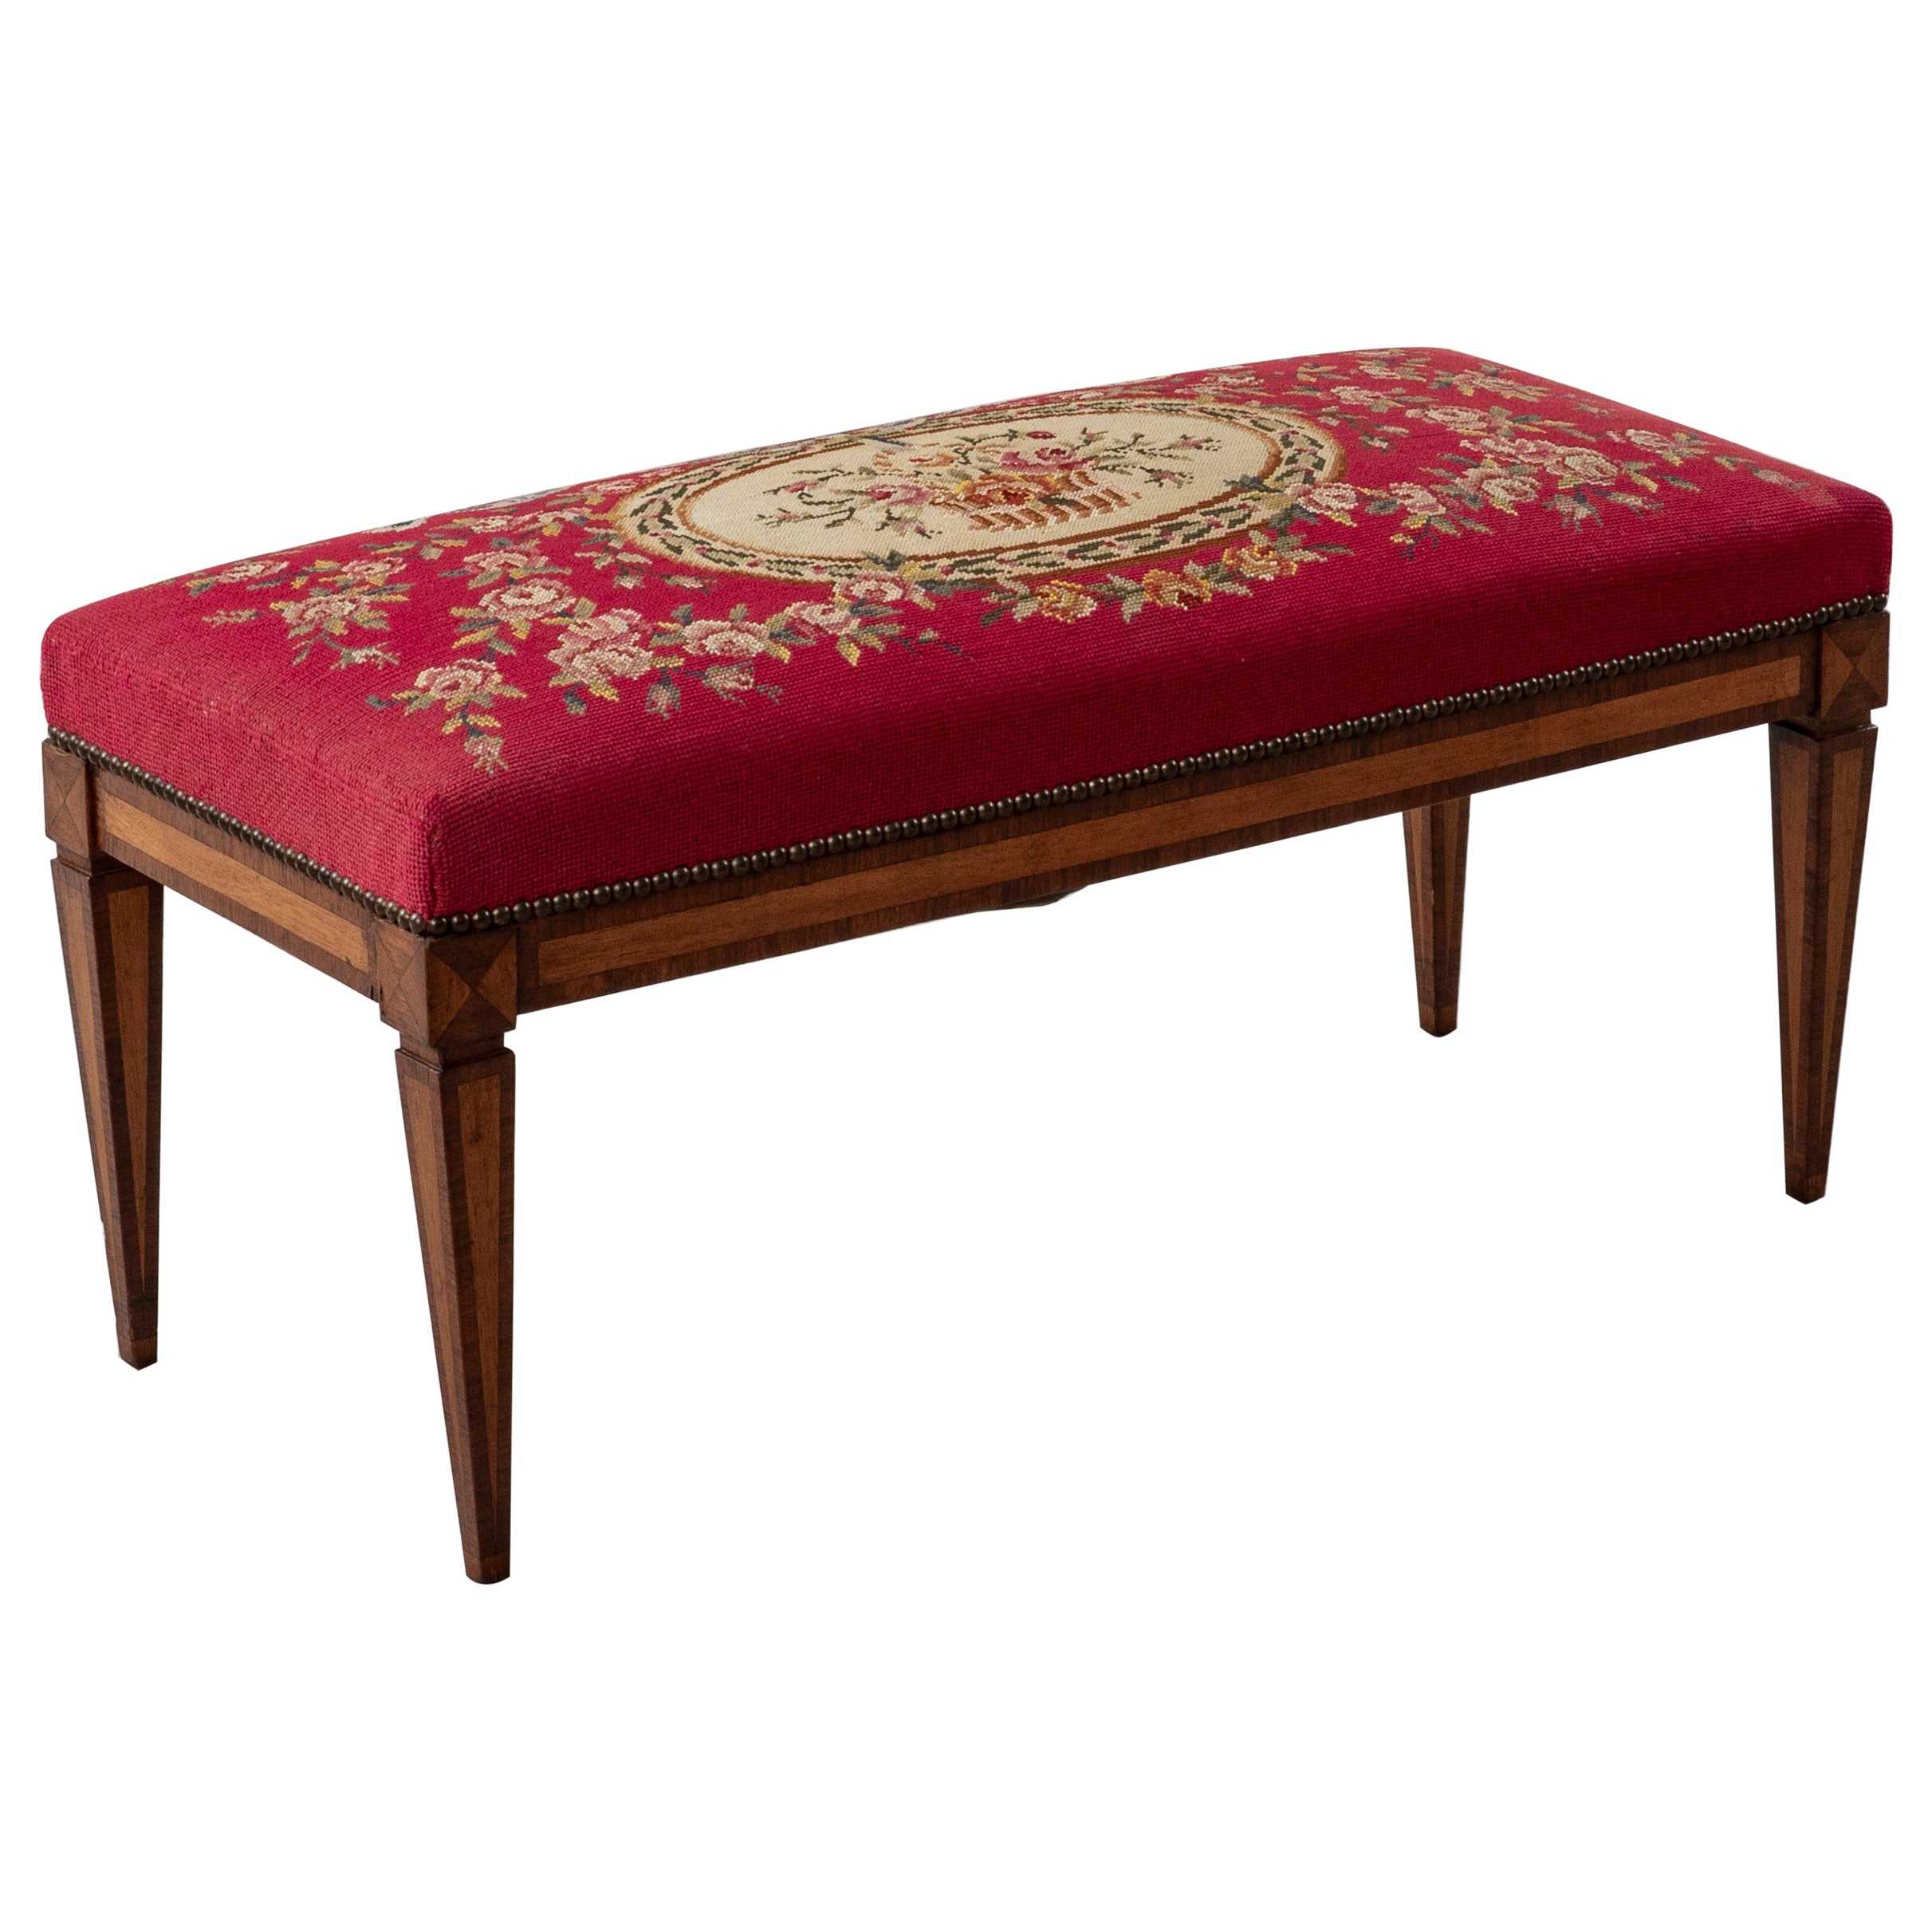 19th Century French Louis XVI Style Marquetry Bench, Banquette, Needlepoint  For Sale